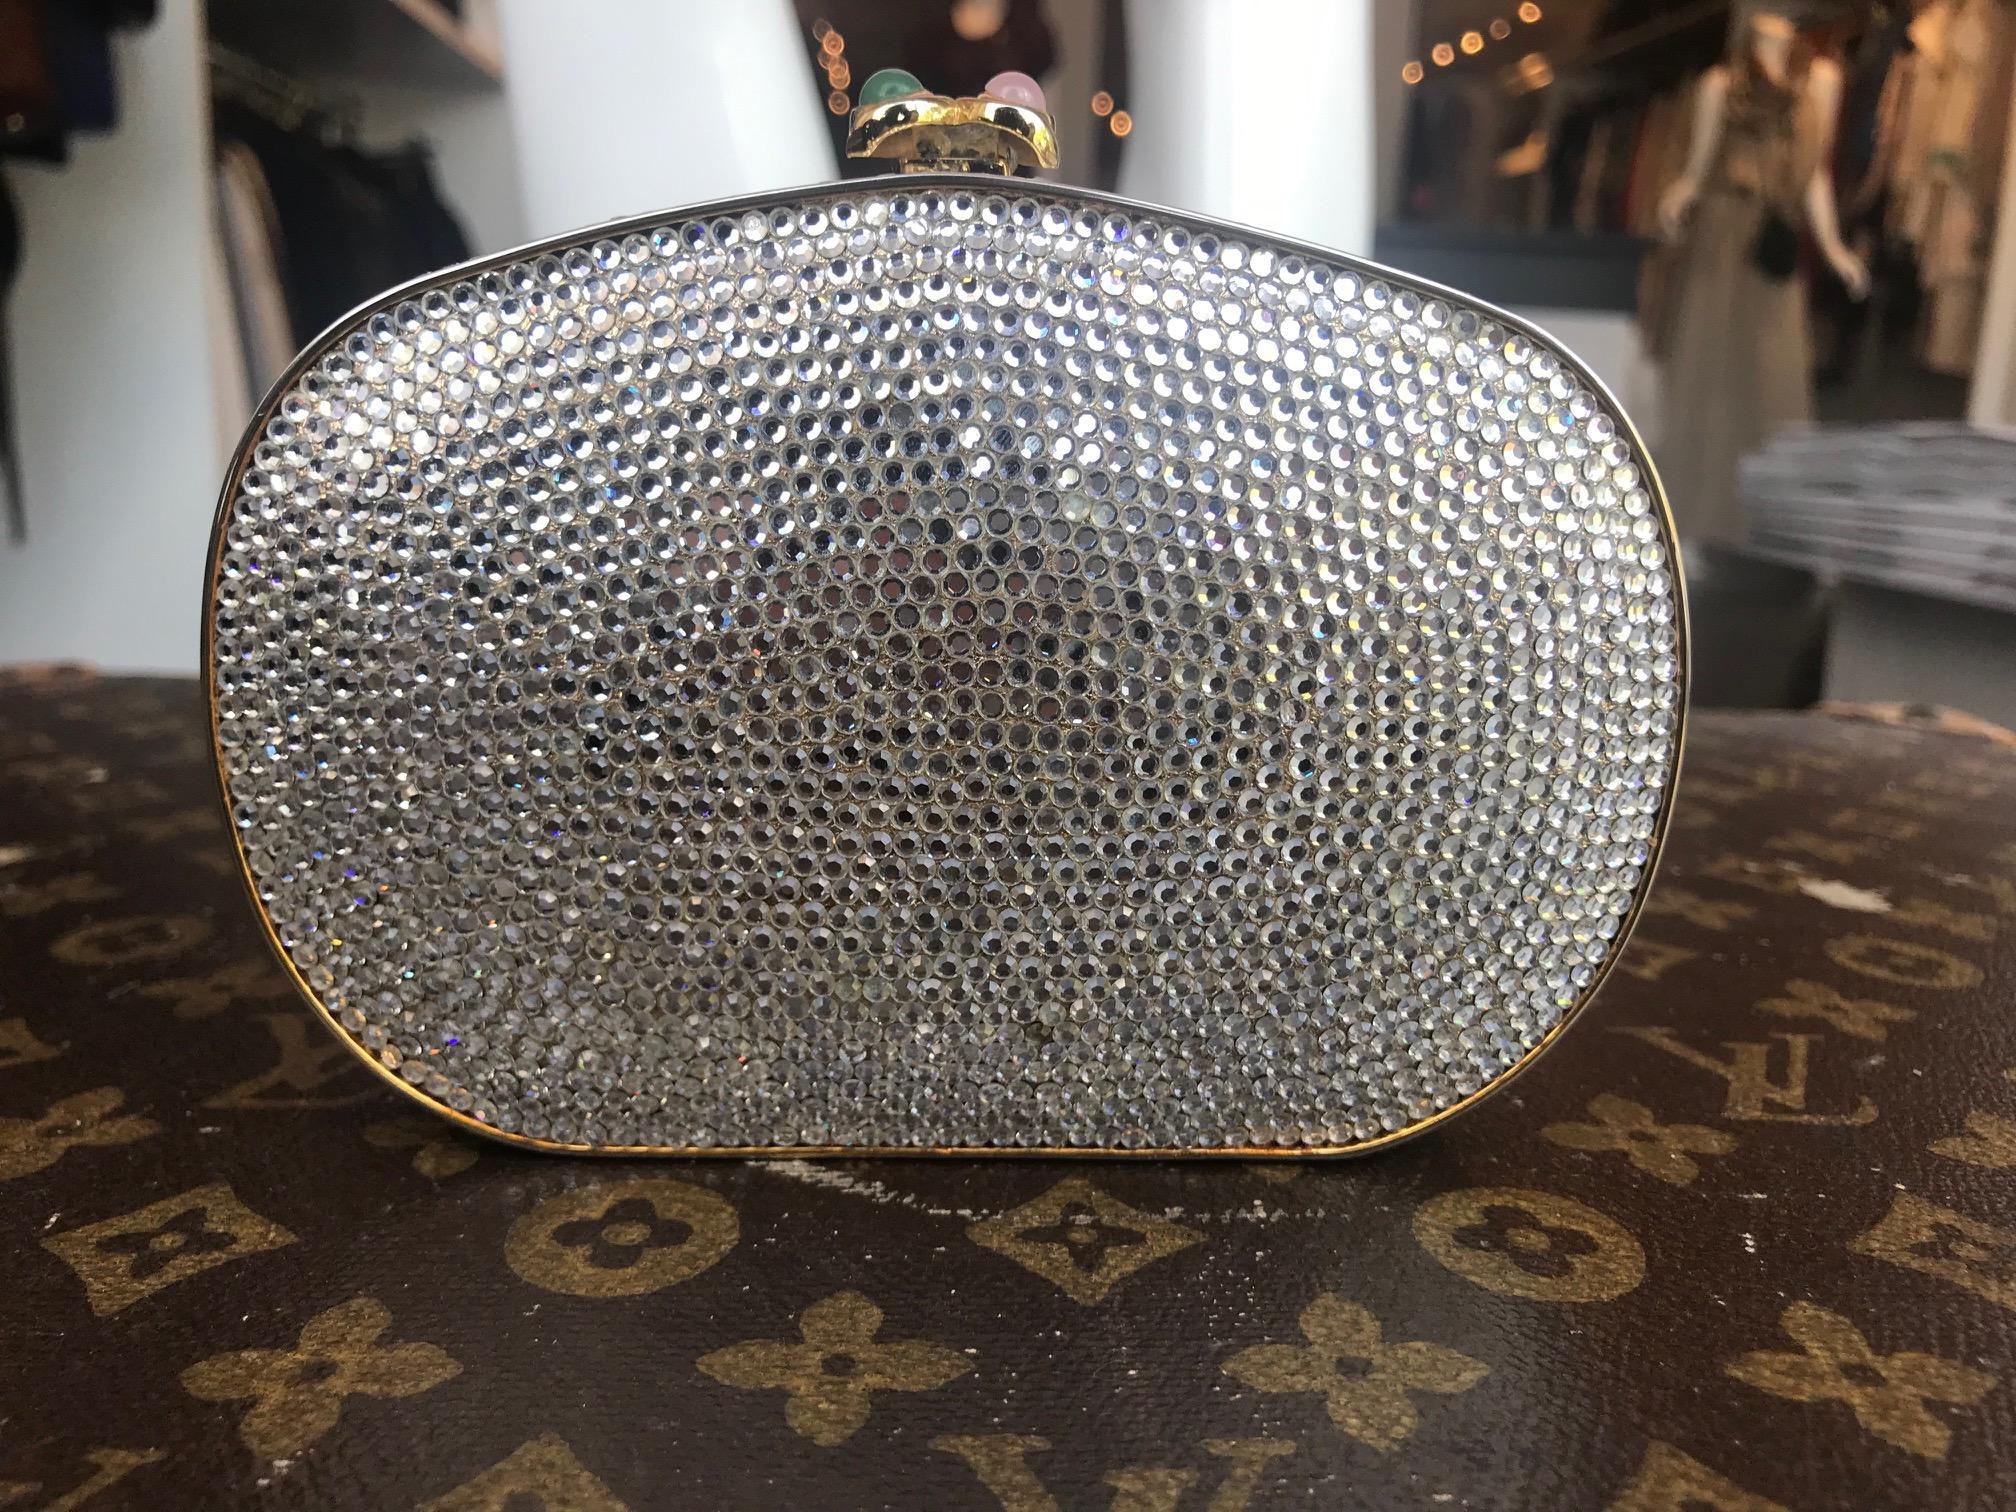 Judith Leiber Embellished Evening Box Clutch In Excellent Condition For Sale In Roslyn, NY